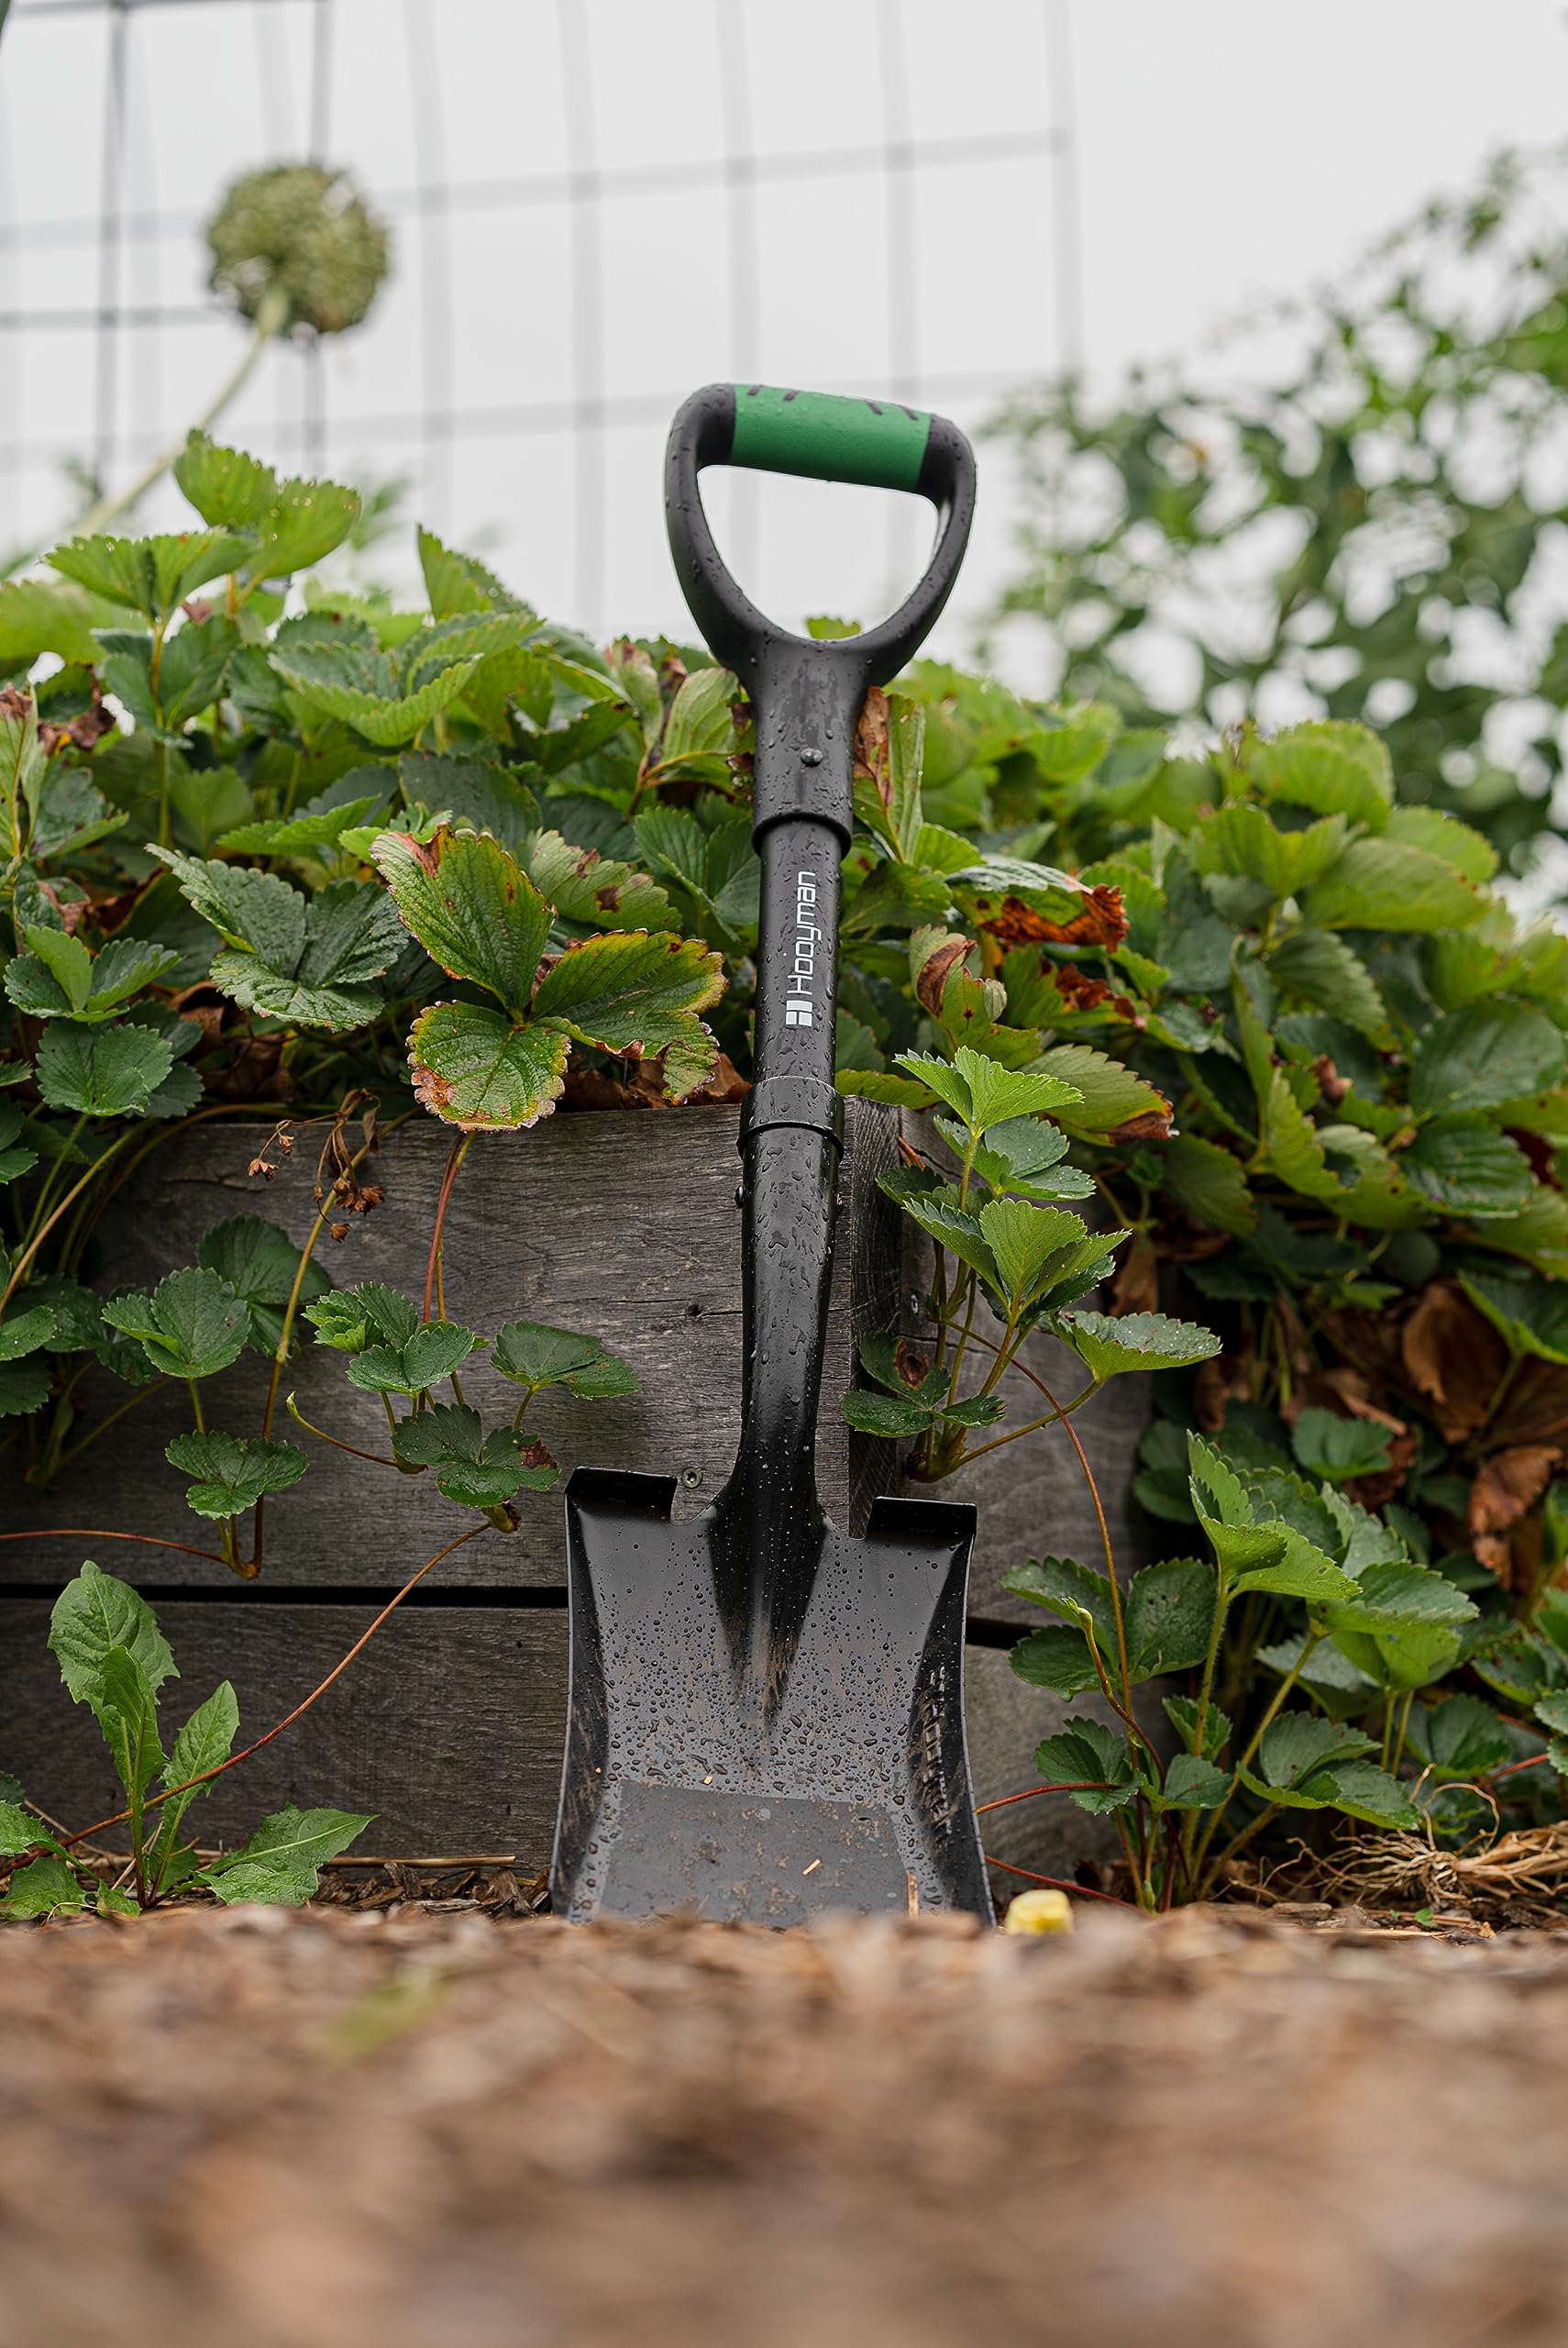 Hooyman Mini Transfer Shovel with Heavy Duty Carbon Steel Construction, Ergonomic No-Slip H-Grip Handles, D Handle, and Oversized Steps for Gardening, Land Management, Yardwork, Farming, and Outdoors